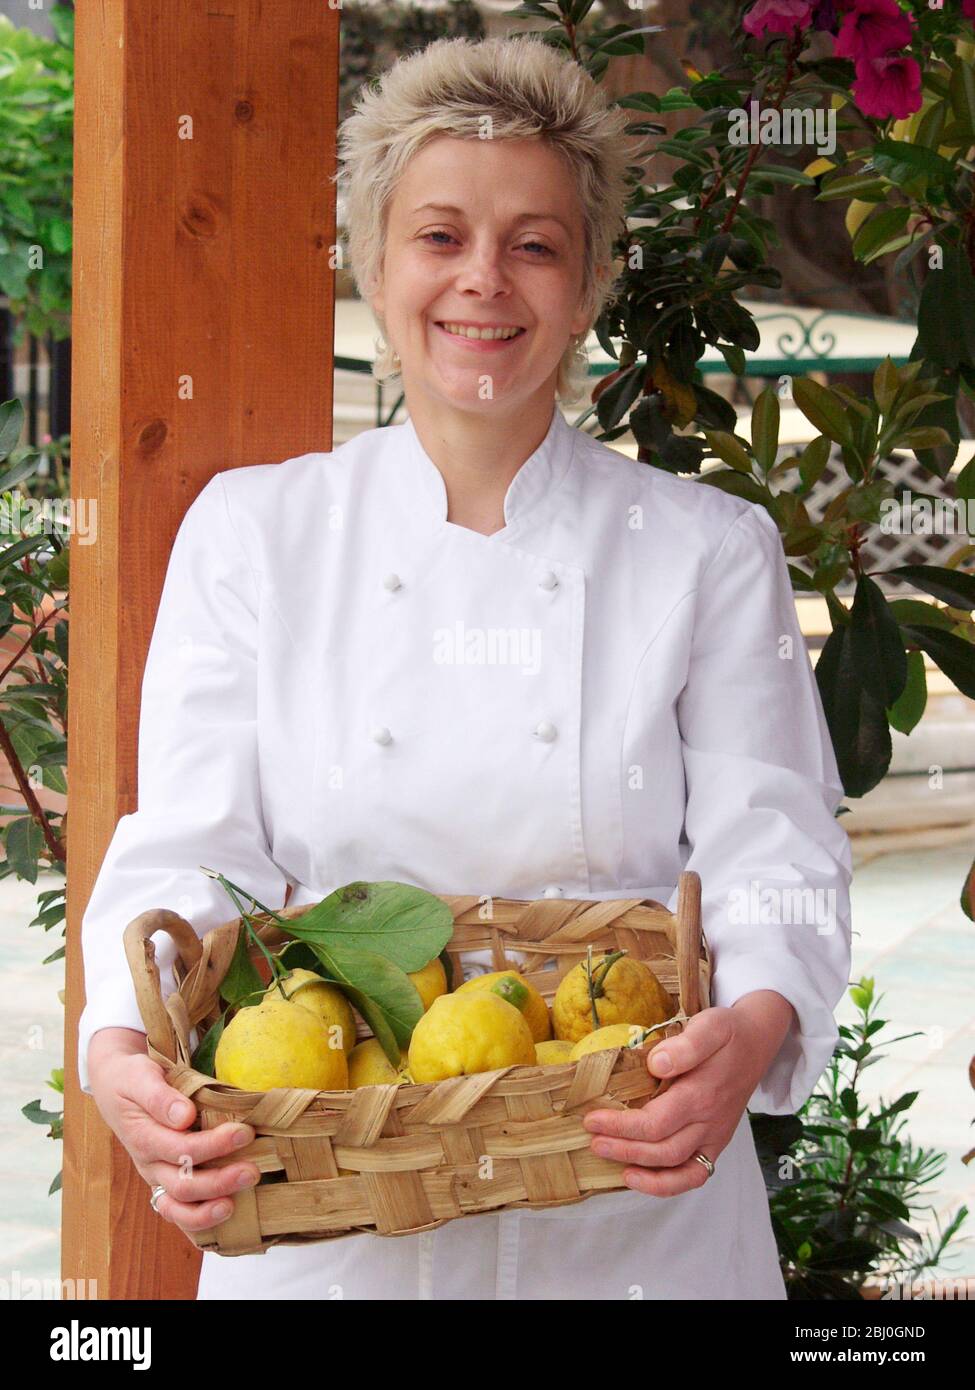 Cookery writer and stylist, Felicity Barnum-Bobb in Italy with basket of Italian fresh produce - Stock Photo